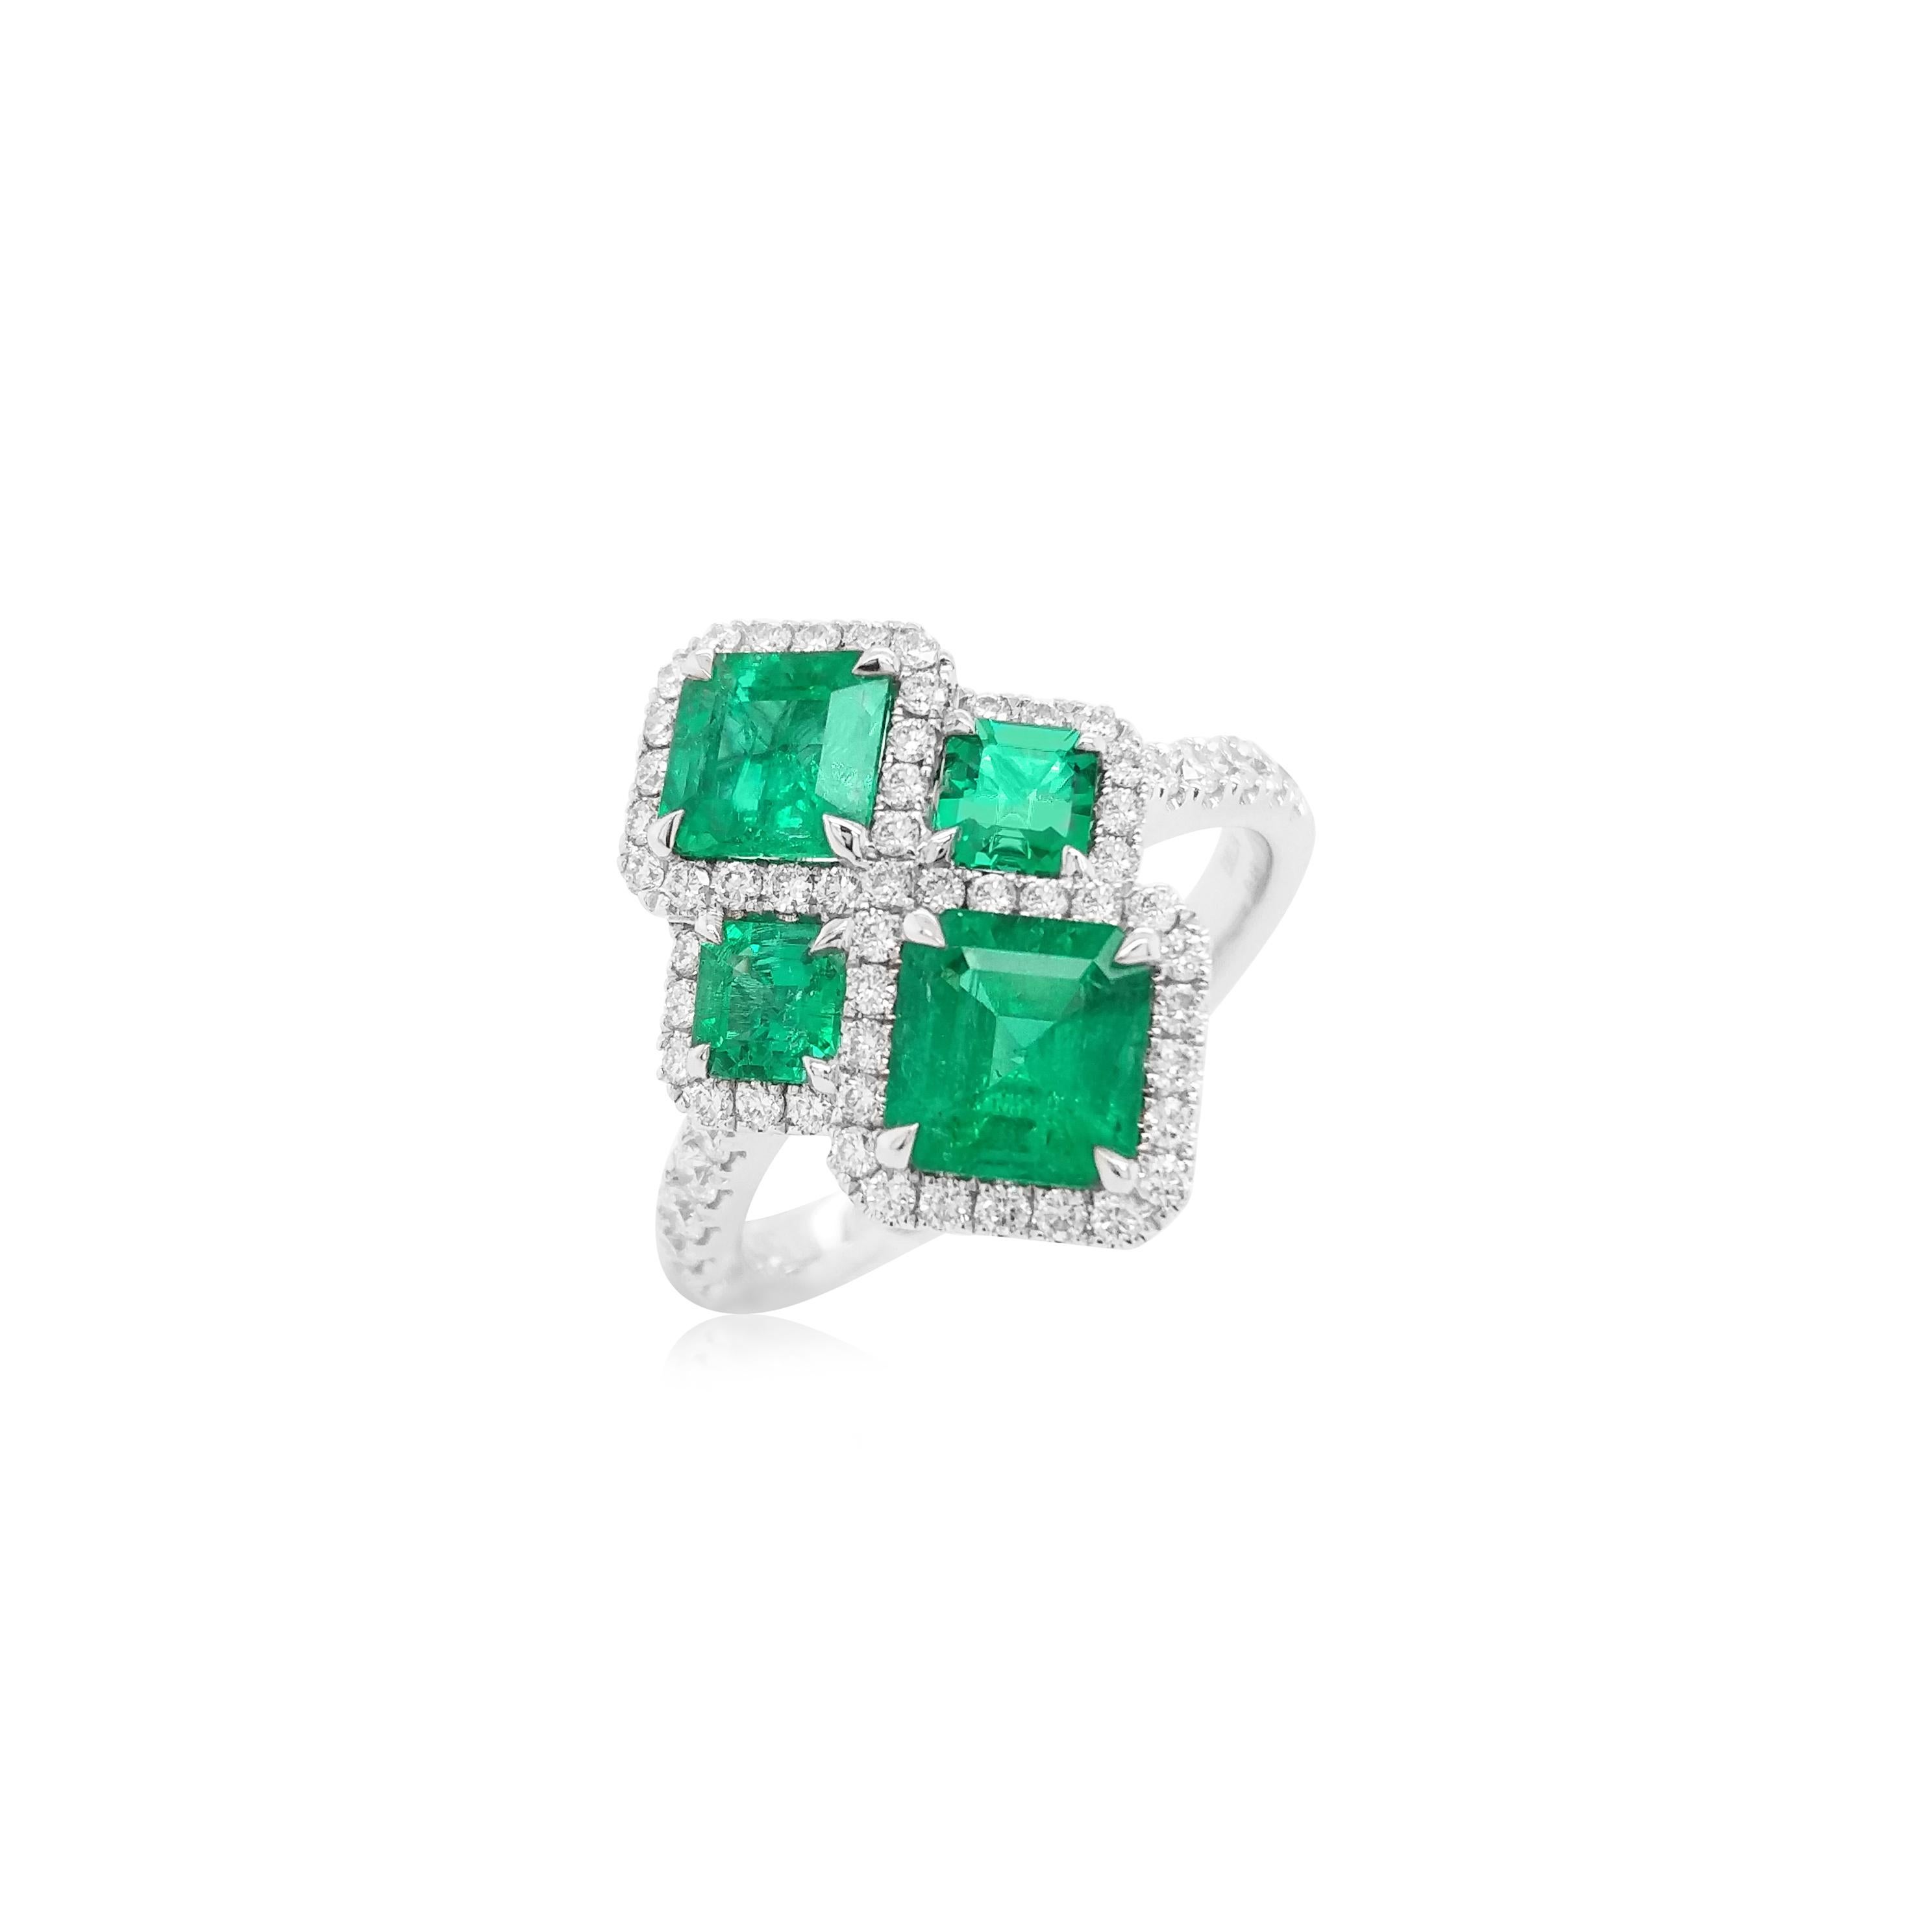 Emerald Cut Certified Colombian Emerald White Diamond 18K Gold Cocktail Ring